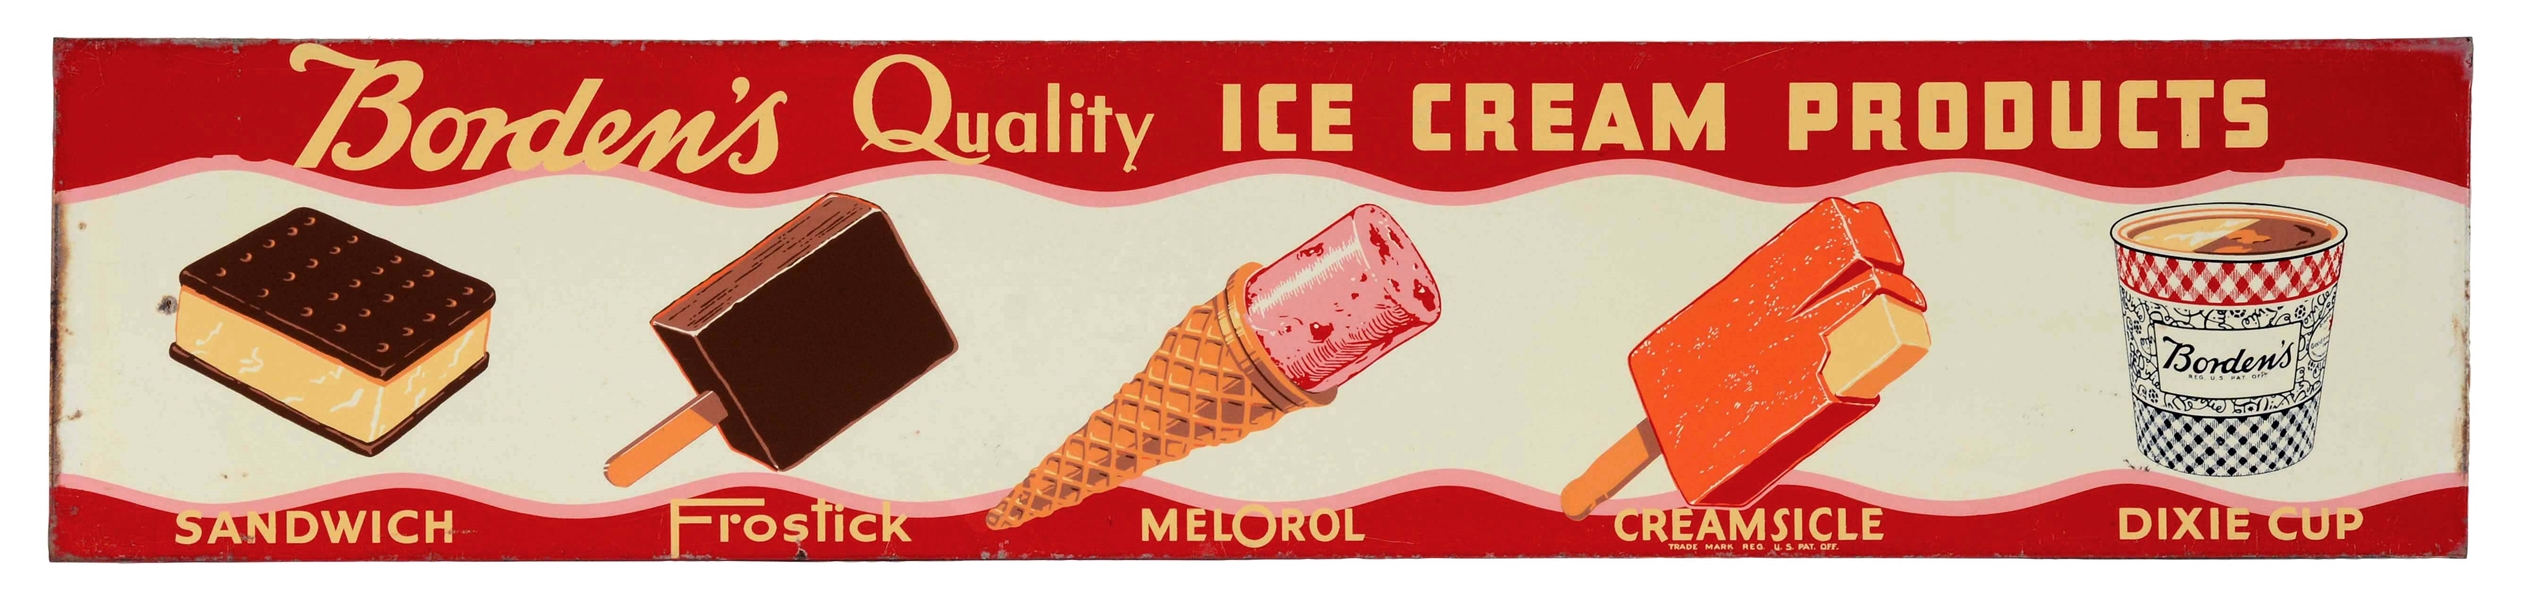 BORDENS QUALITY ICE CREAM PRODUCTS TIN SIGN WITH ICE CREAM GRAPHICS.